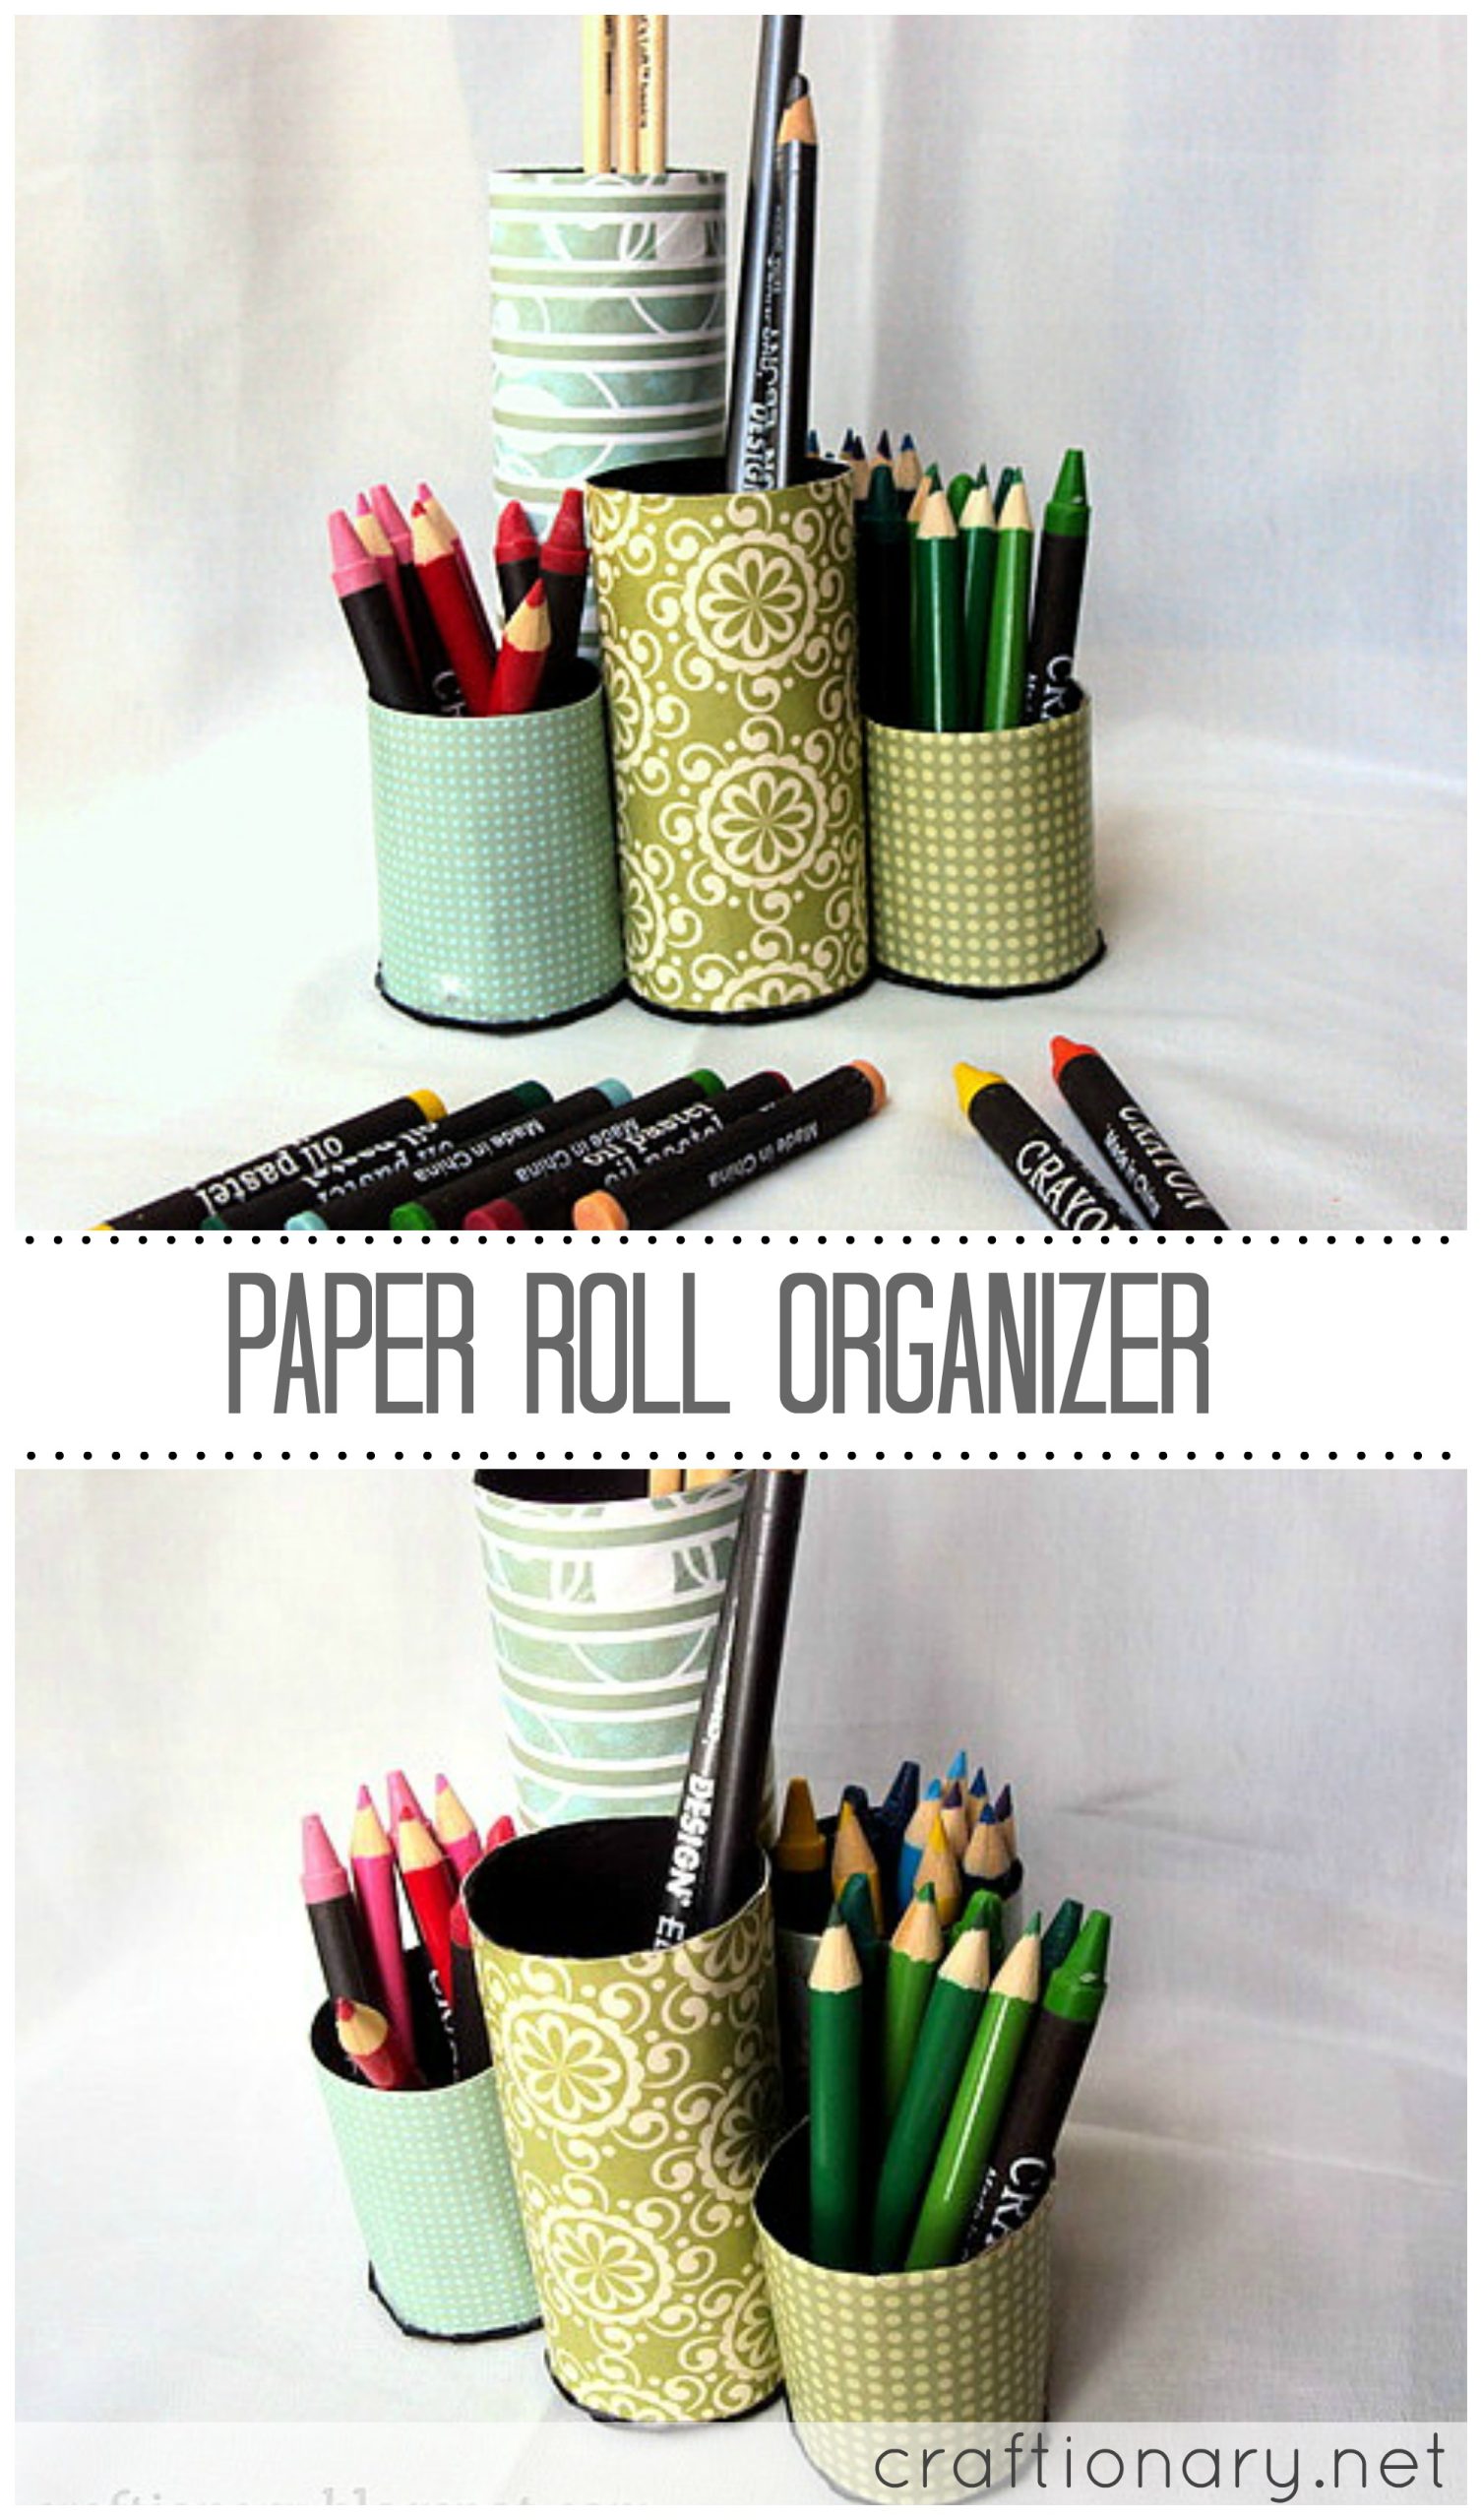 DIY Desk Organizer from Recycled Materials - Mod Podge Rocks